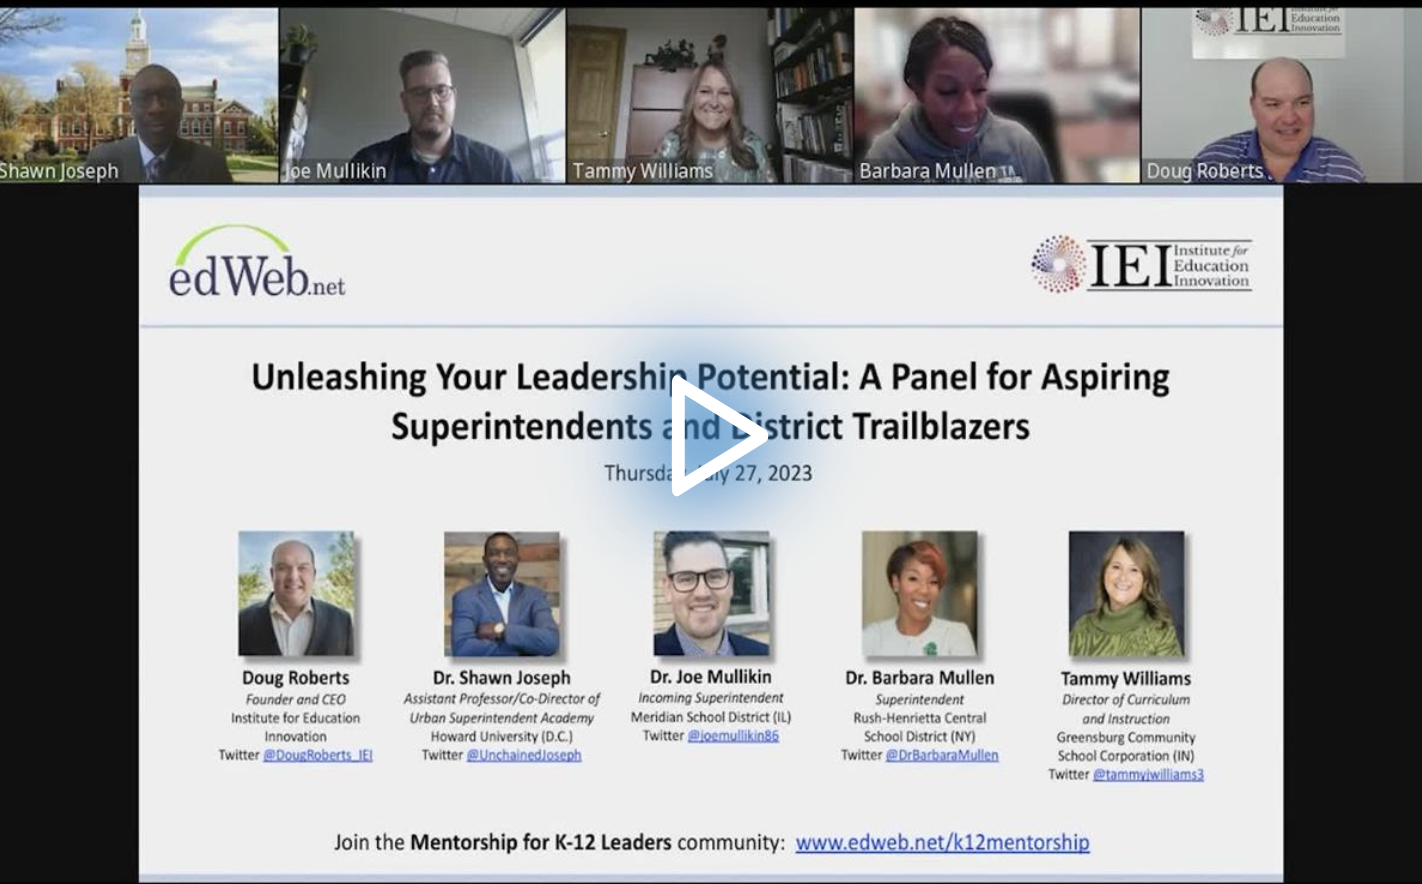 Unleashing Your Leadership Potential: A Panel for Aspiring Superintendents and District Trailblazers edLeader Panel recording image